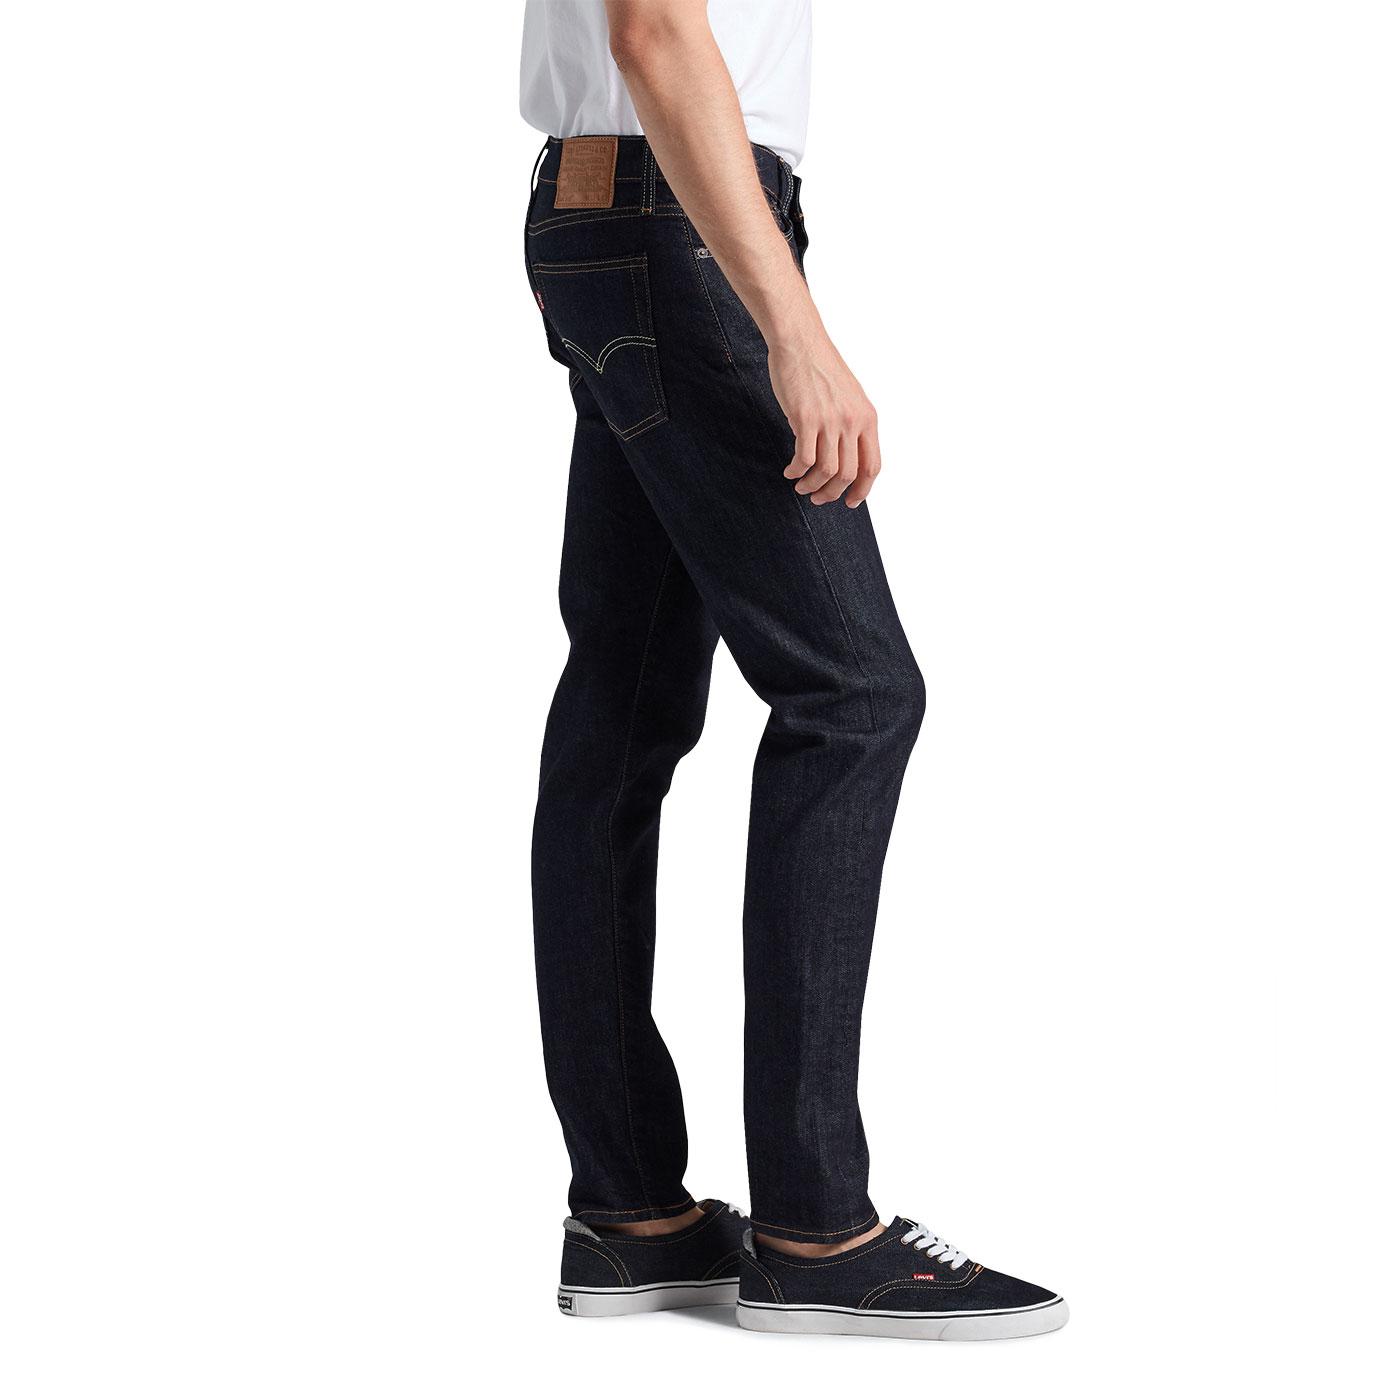 Retro Skinny Fit Jeans in Cleaner Adv 